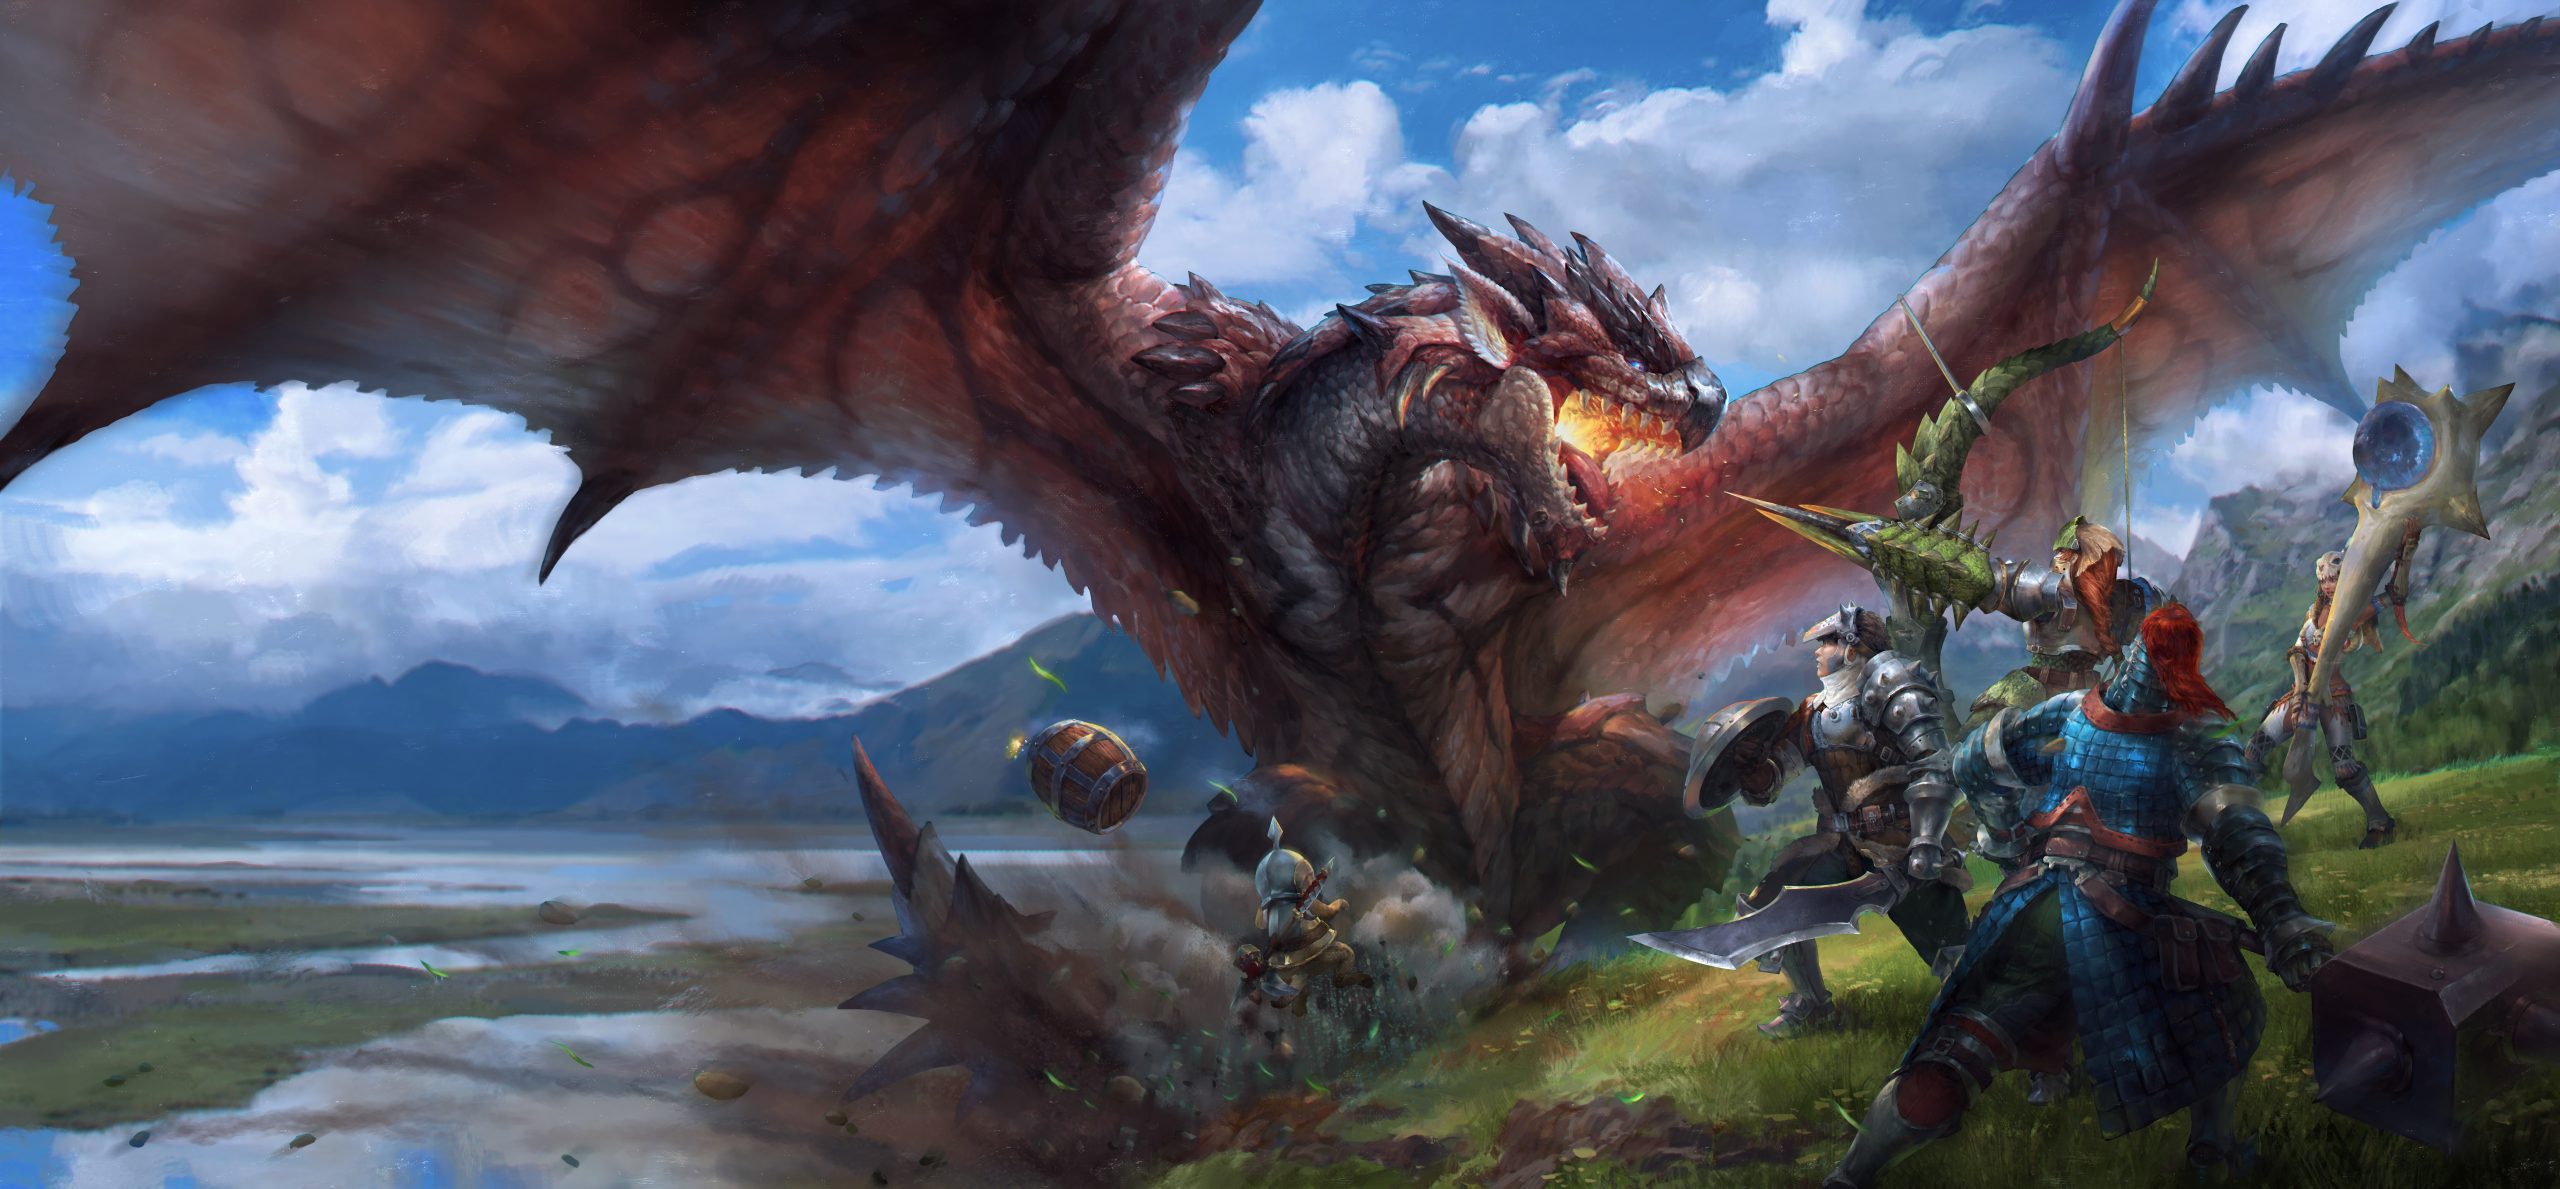 Monster Hunter Backgrounds, Pictures, Images